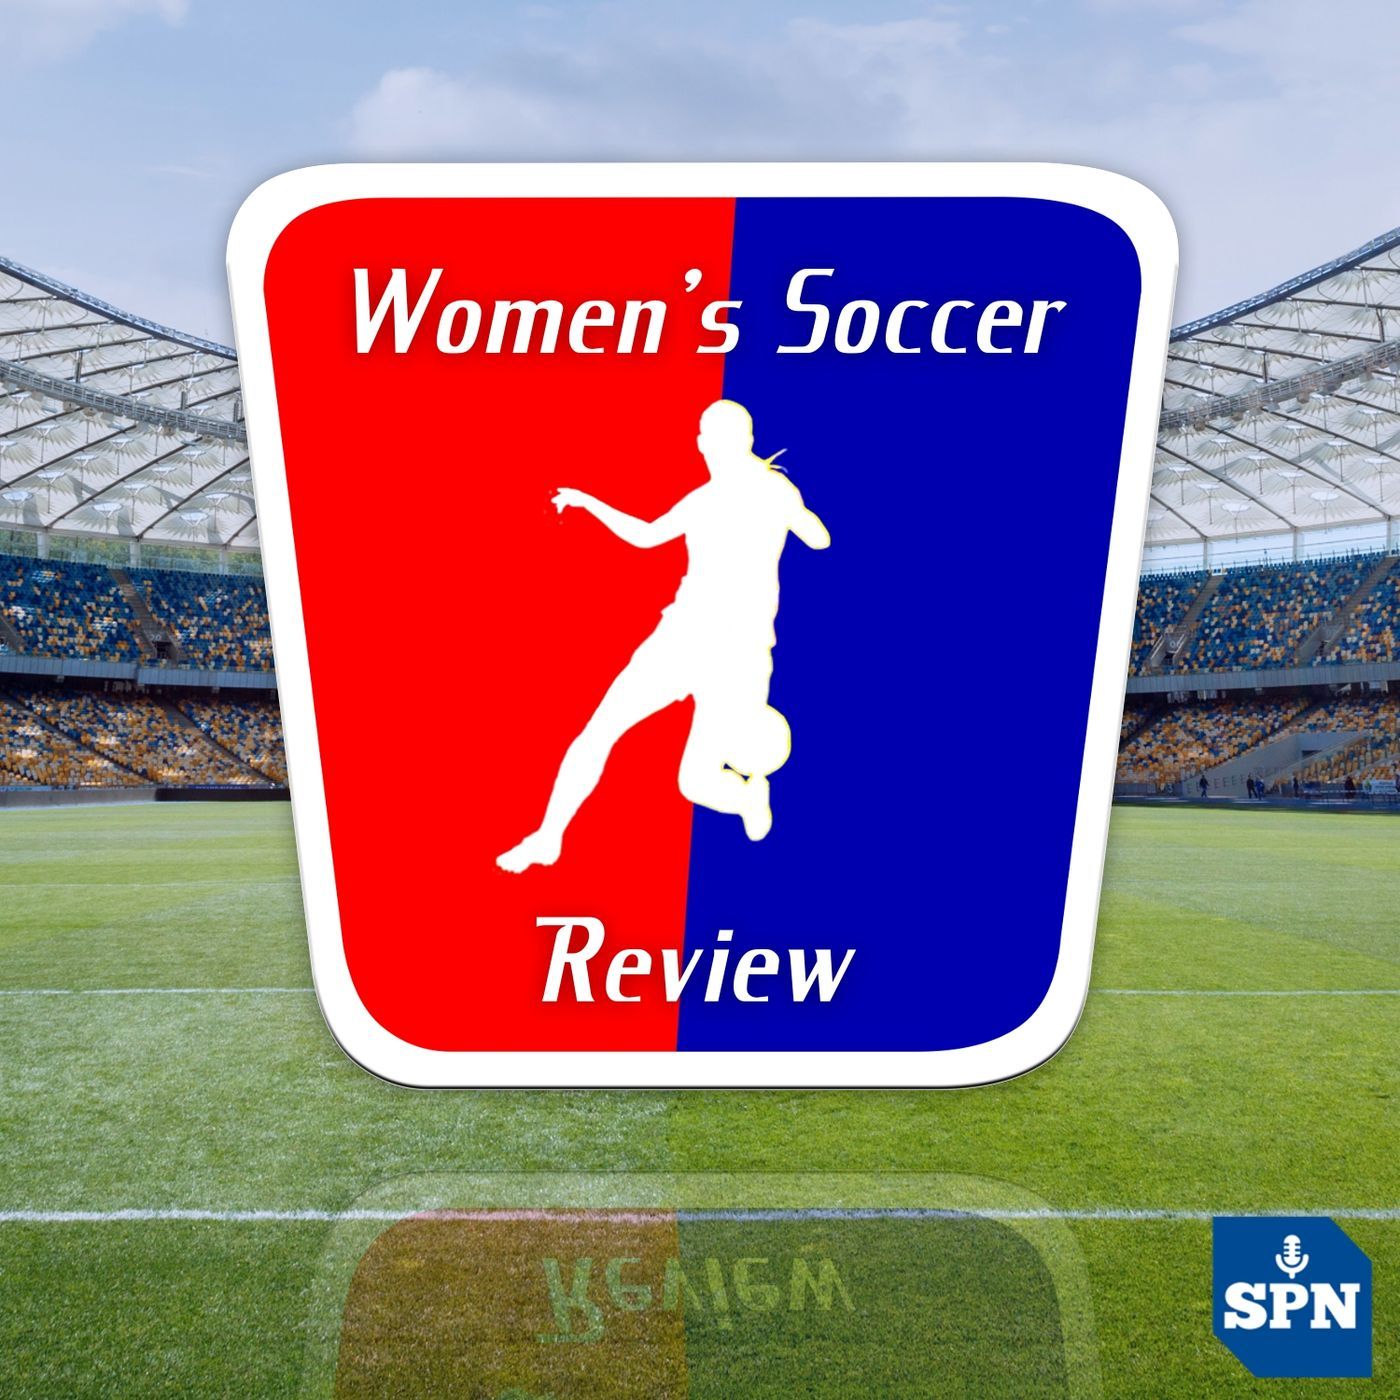 Women's Soccer Review Podcast - France vs USA Preview with Sylvain Jamet